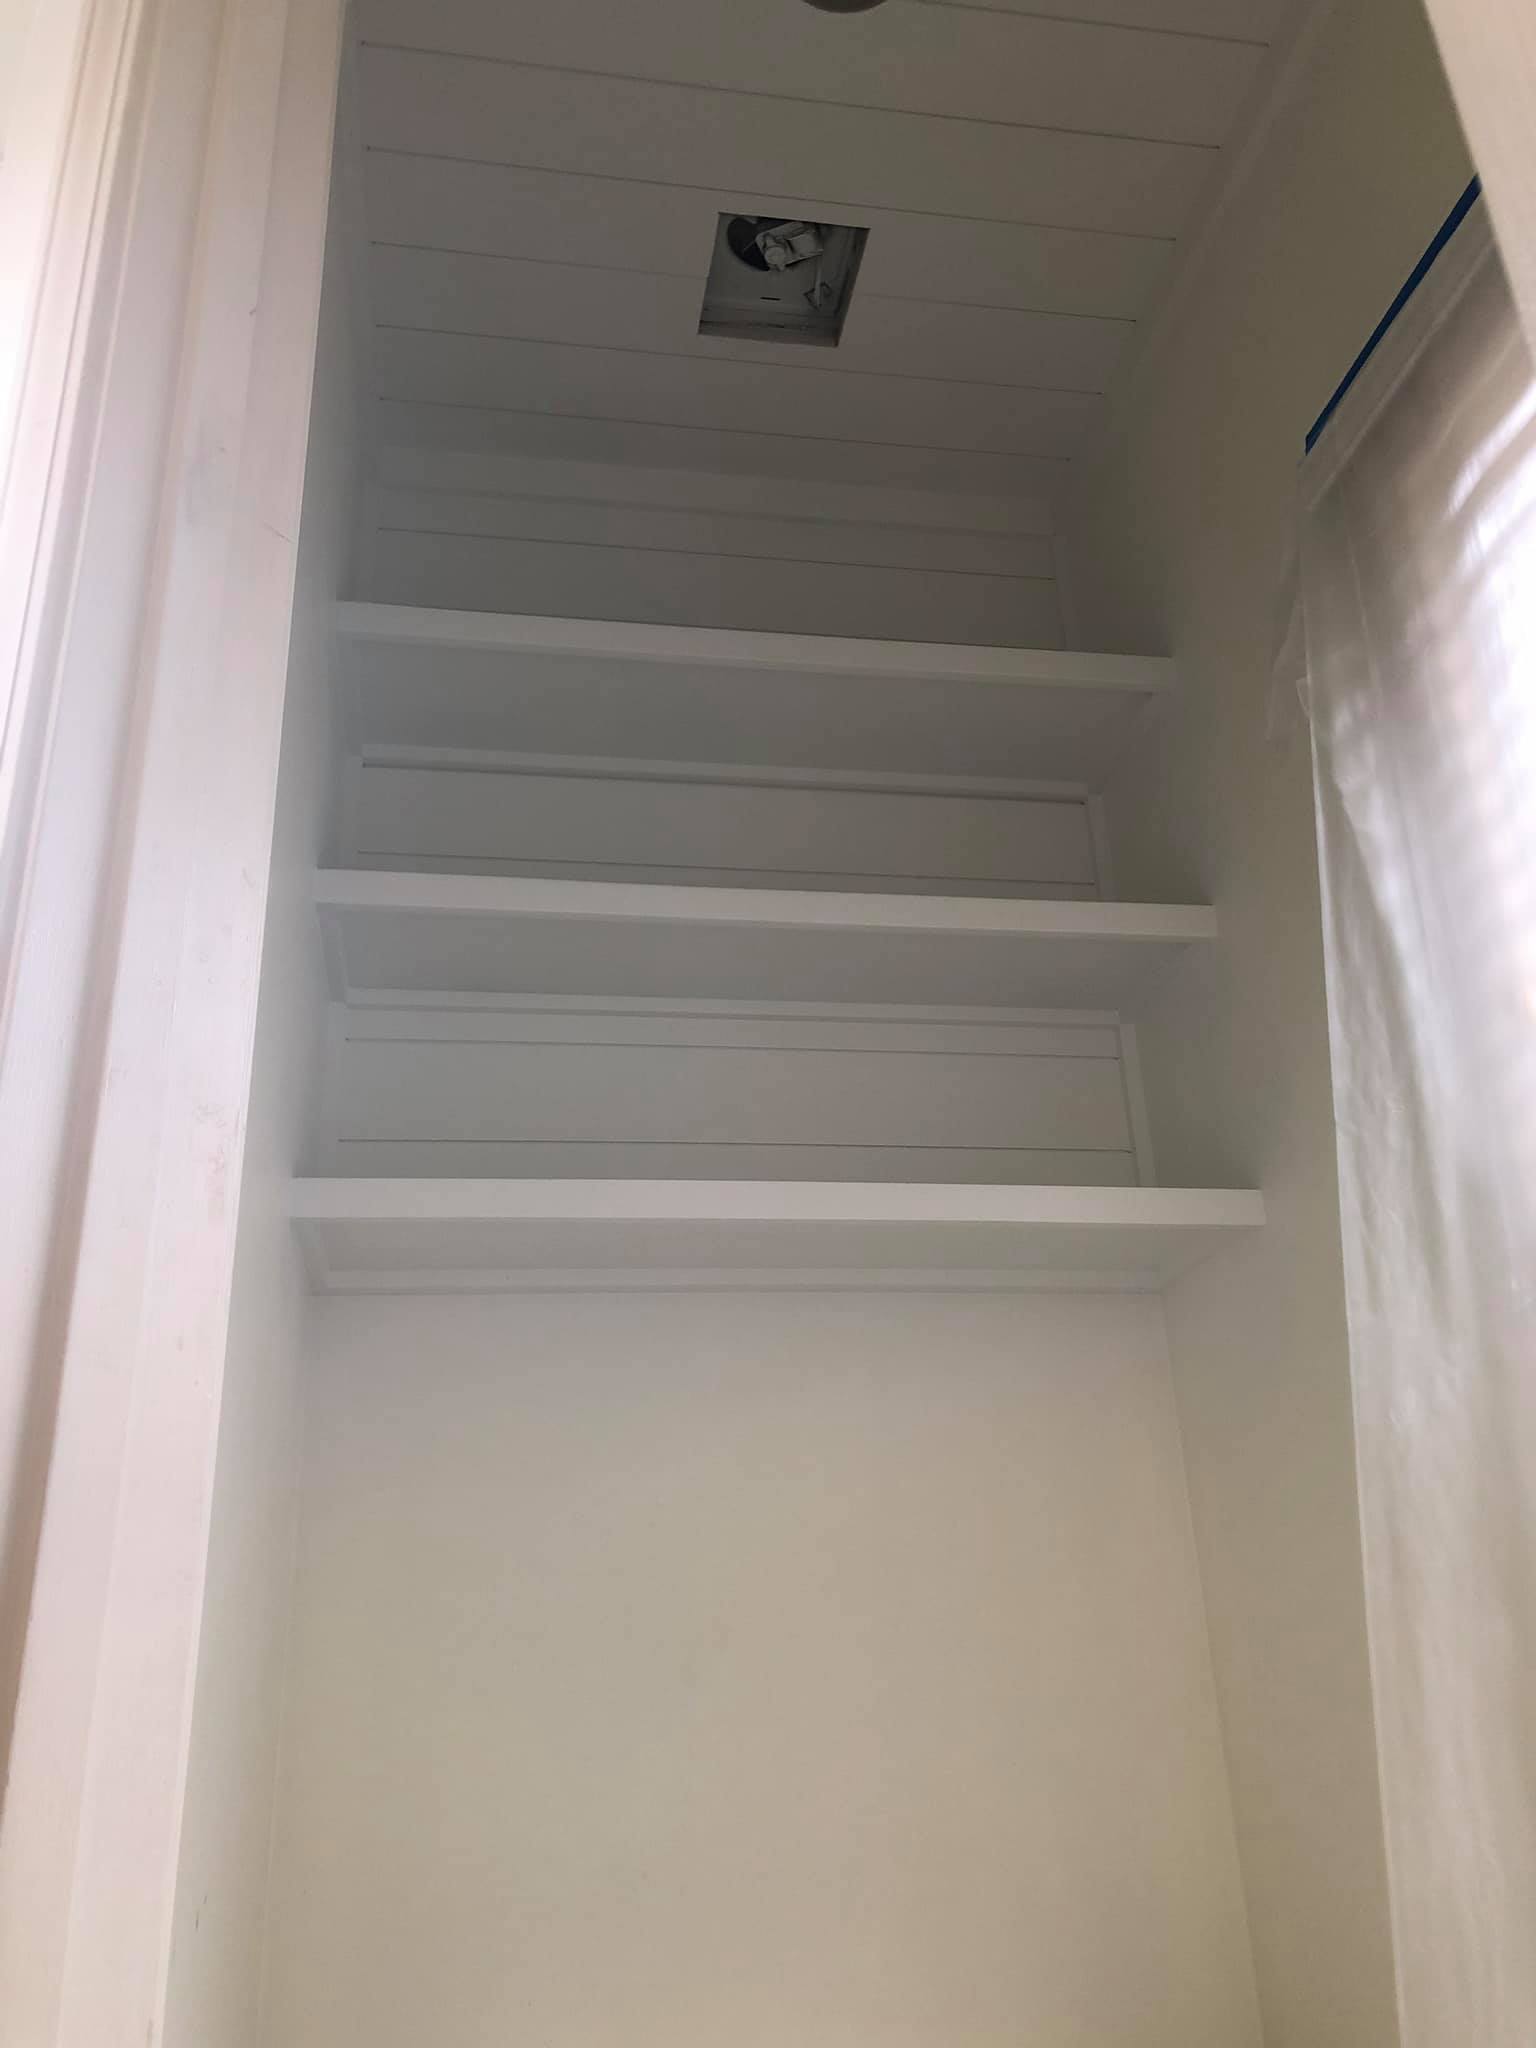 Tongue and Groove with Shiplap on Walls and Ceiling Closet